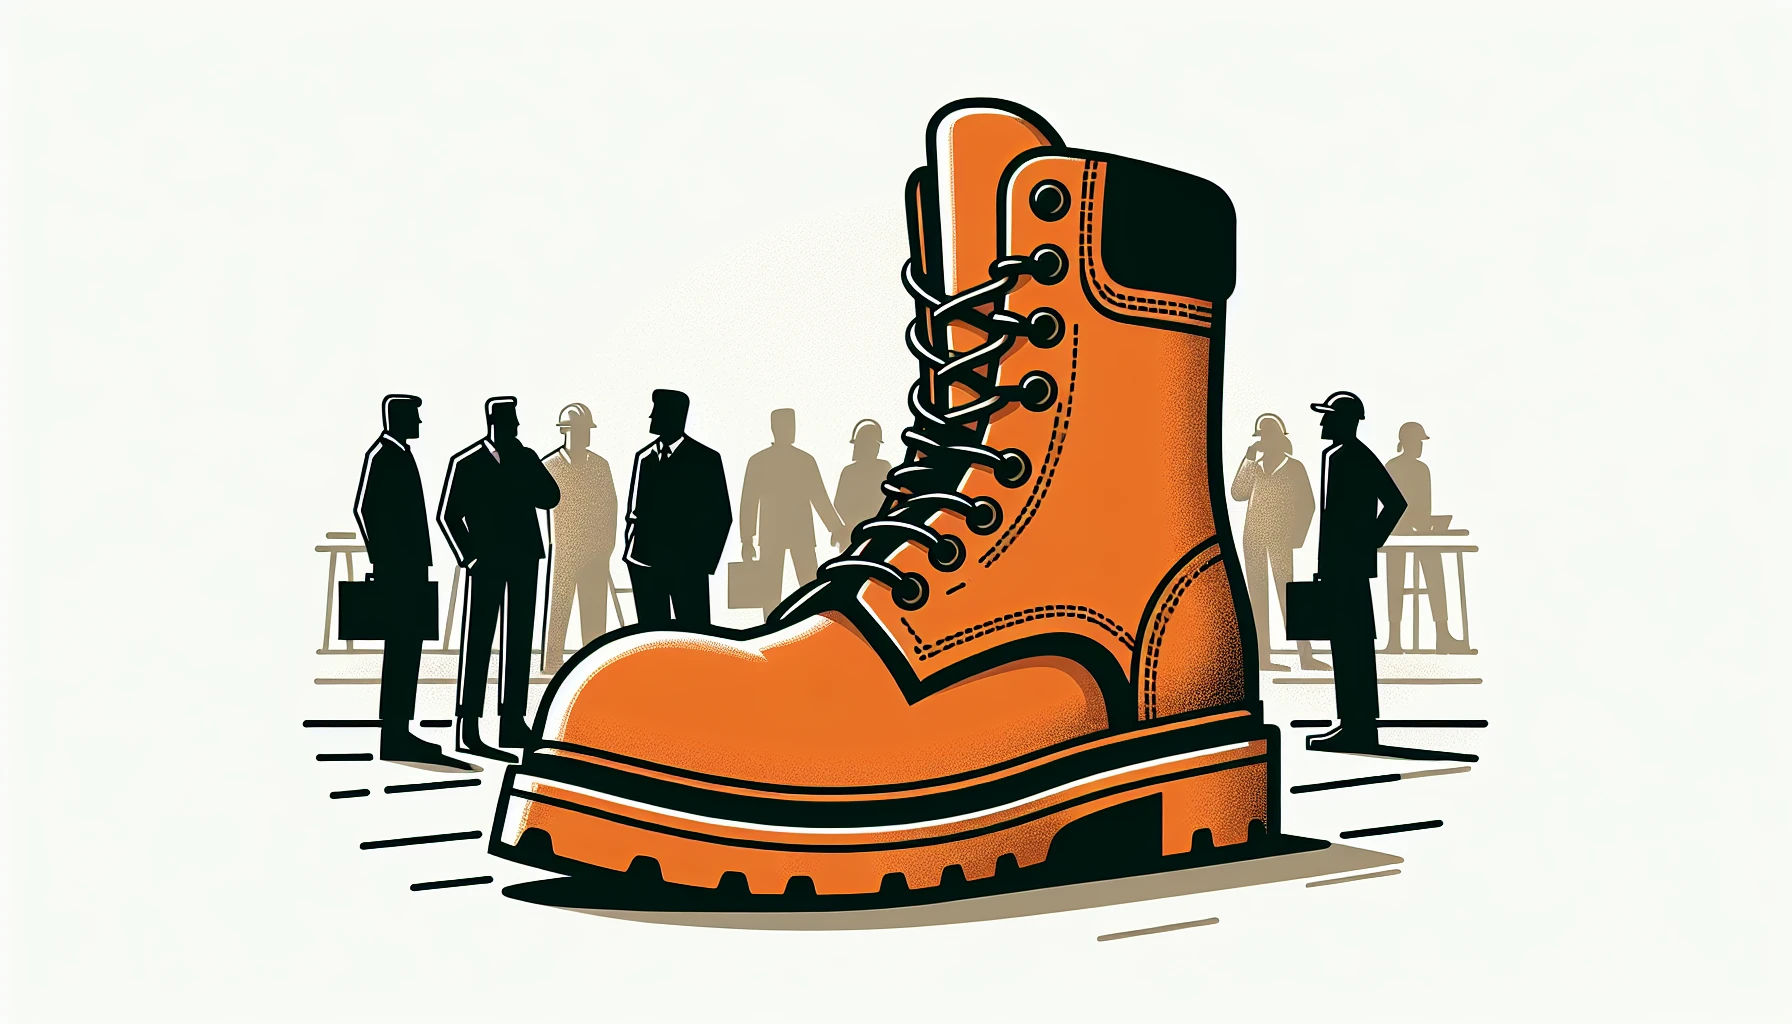 Construction site management system represented by a work boot on a platform